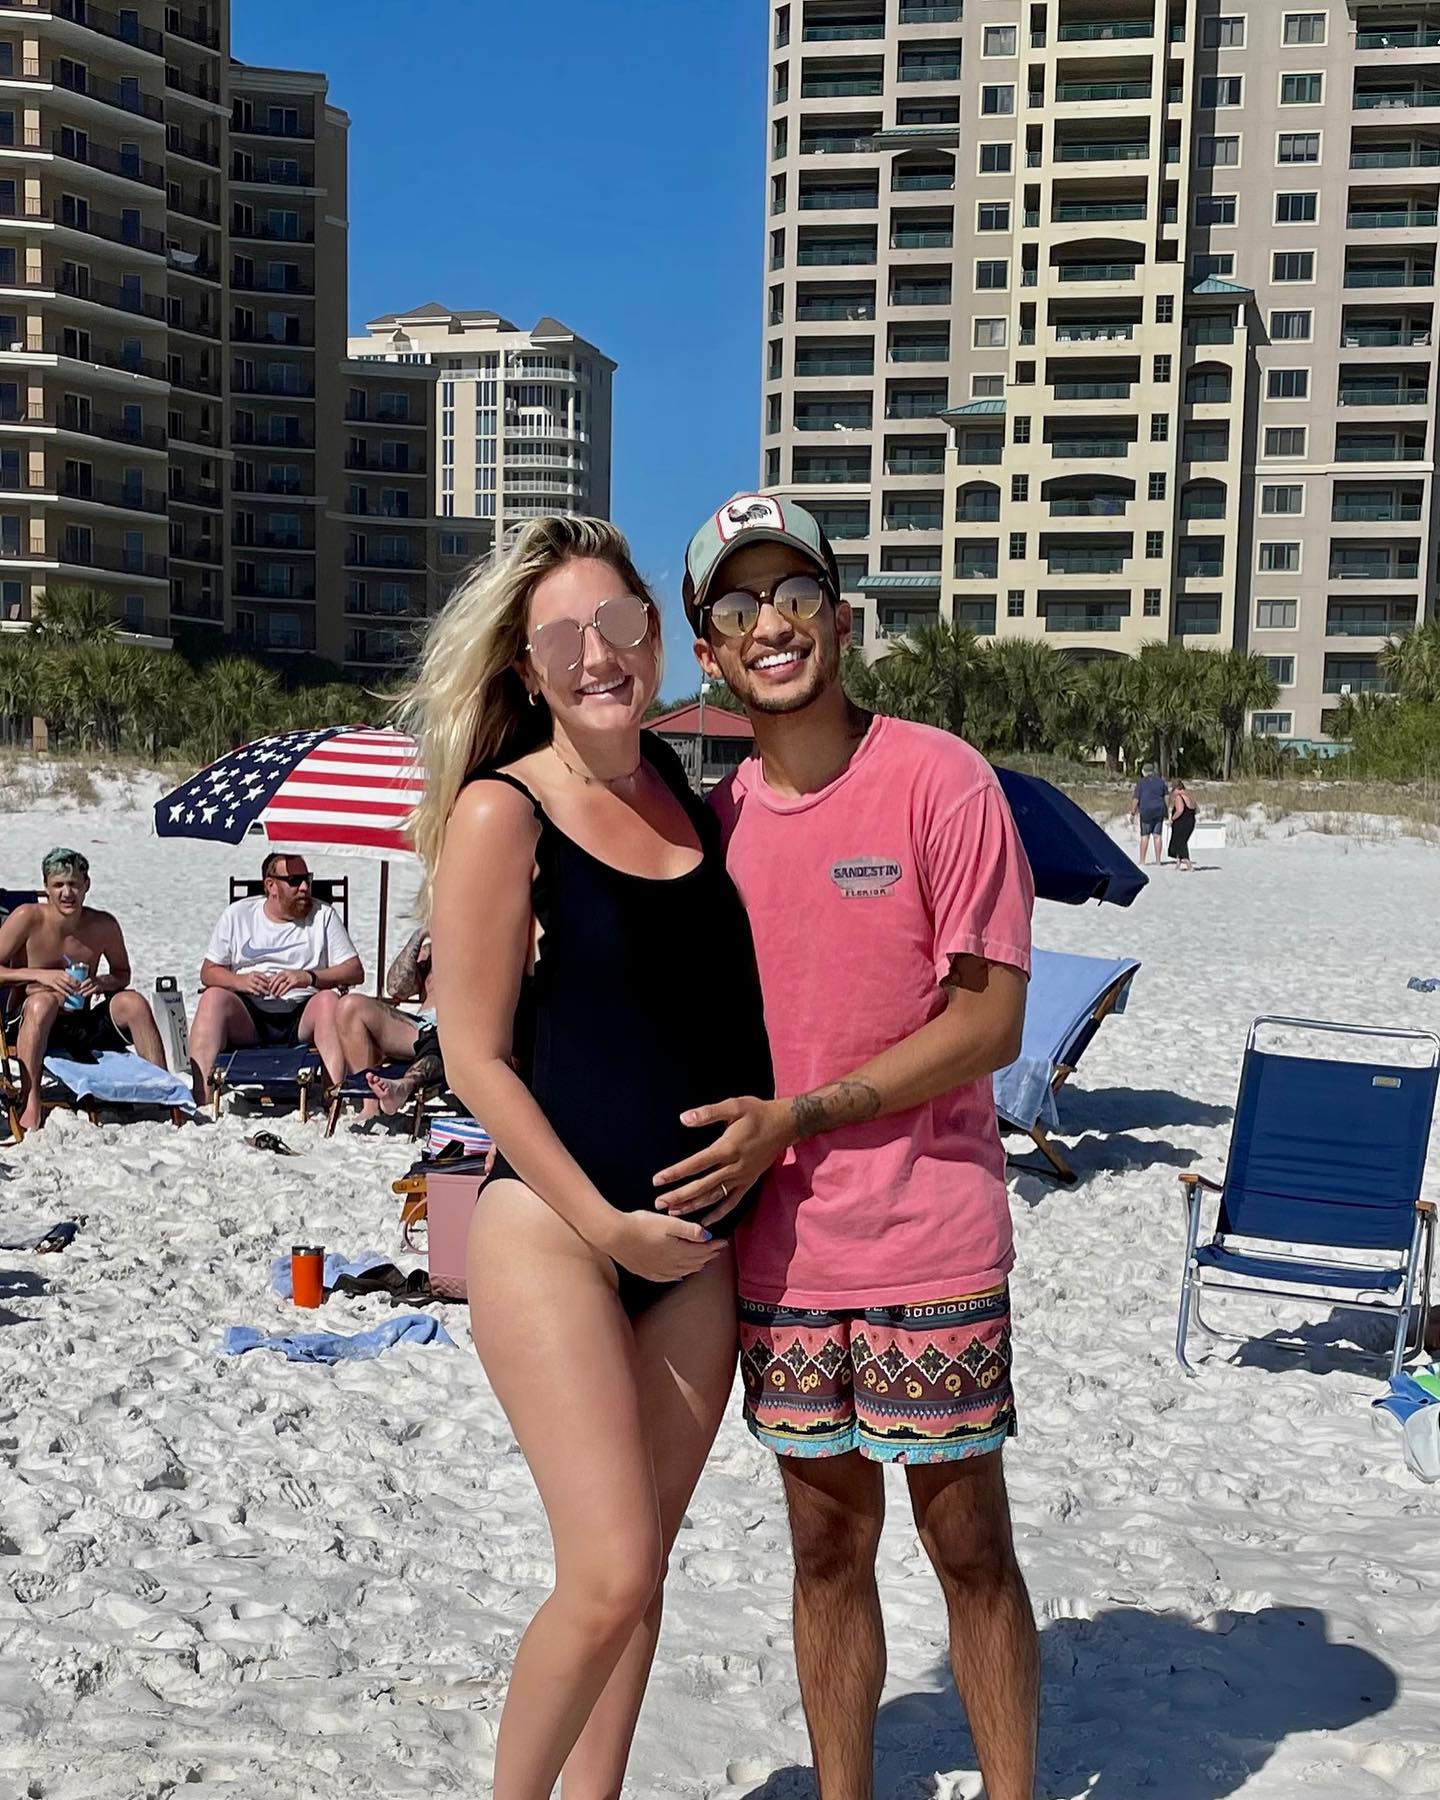 Pregnant Celebrities Show Off 3rd Trimester Baby Bumps in Bikinis photo photo